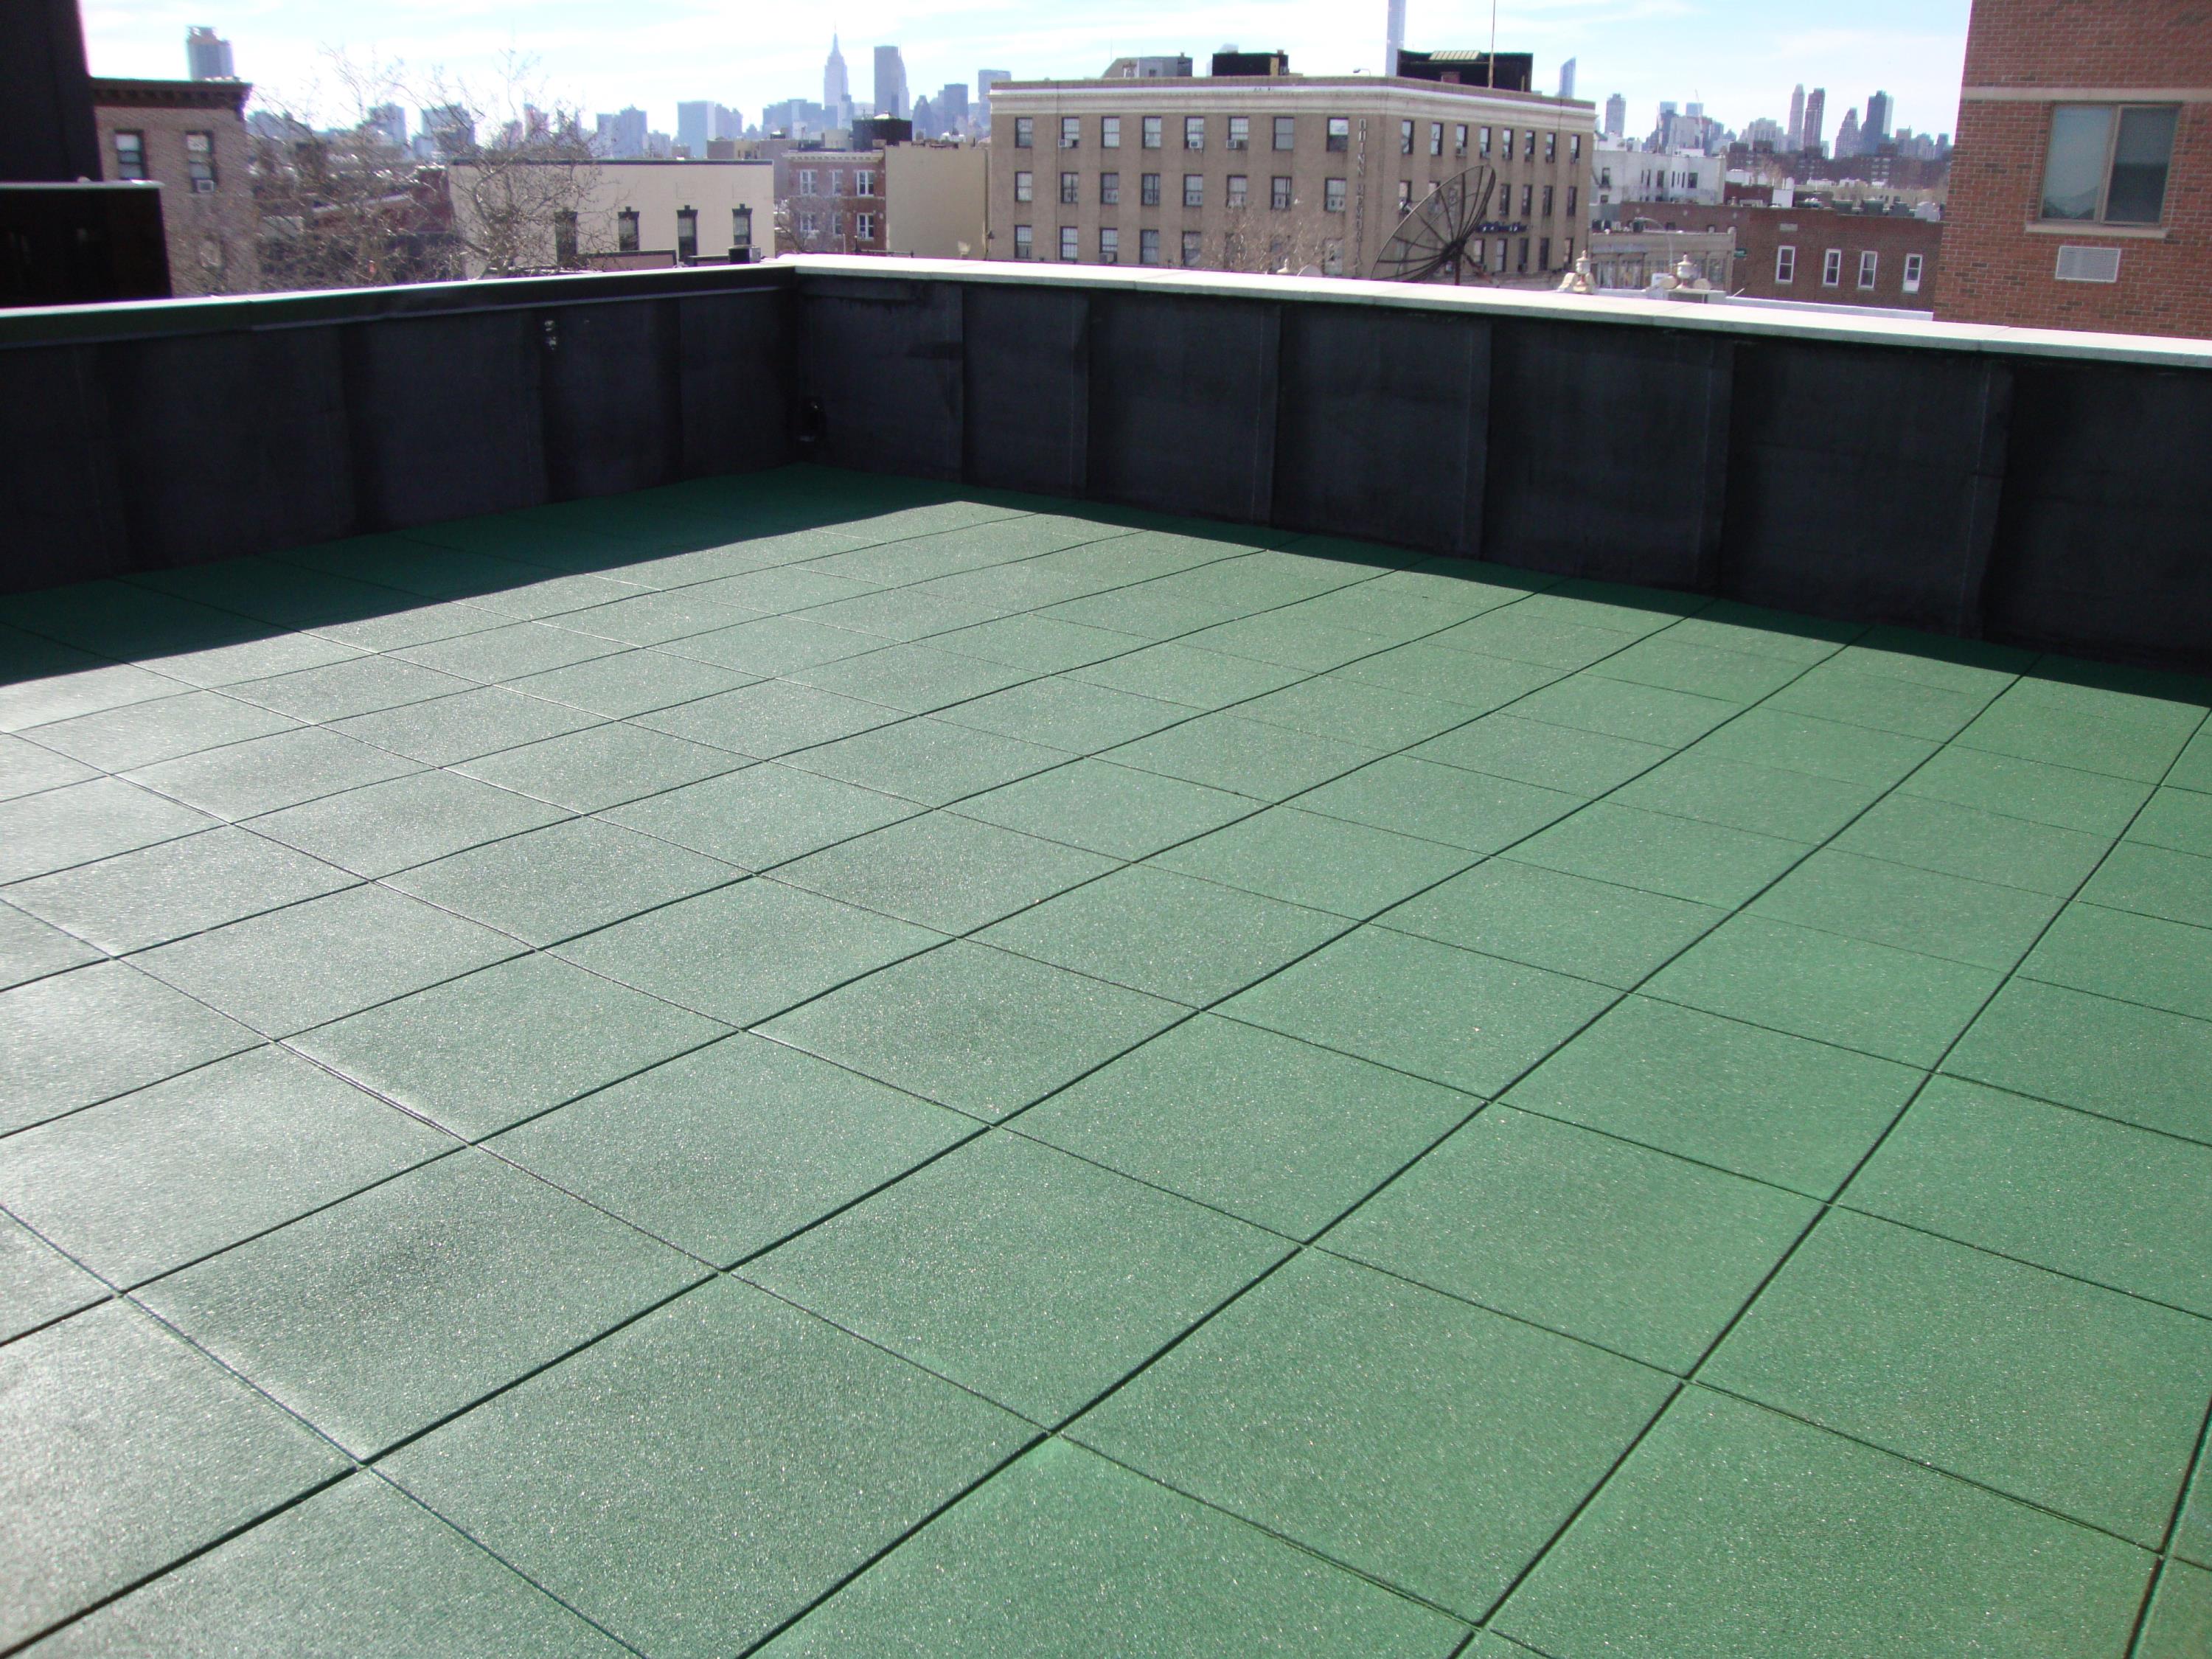 Residential roof deck on top of building using 2" thick green rubber pavers